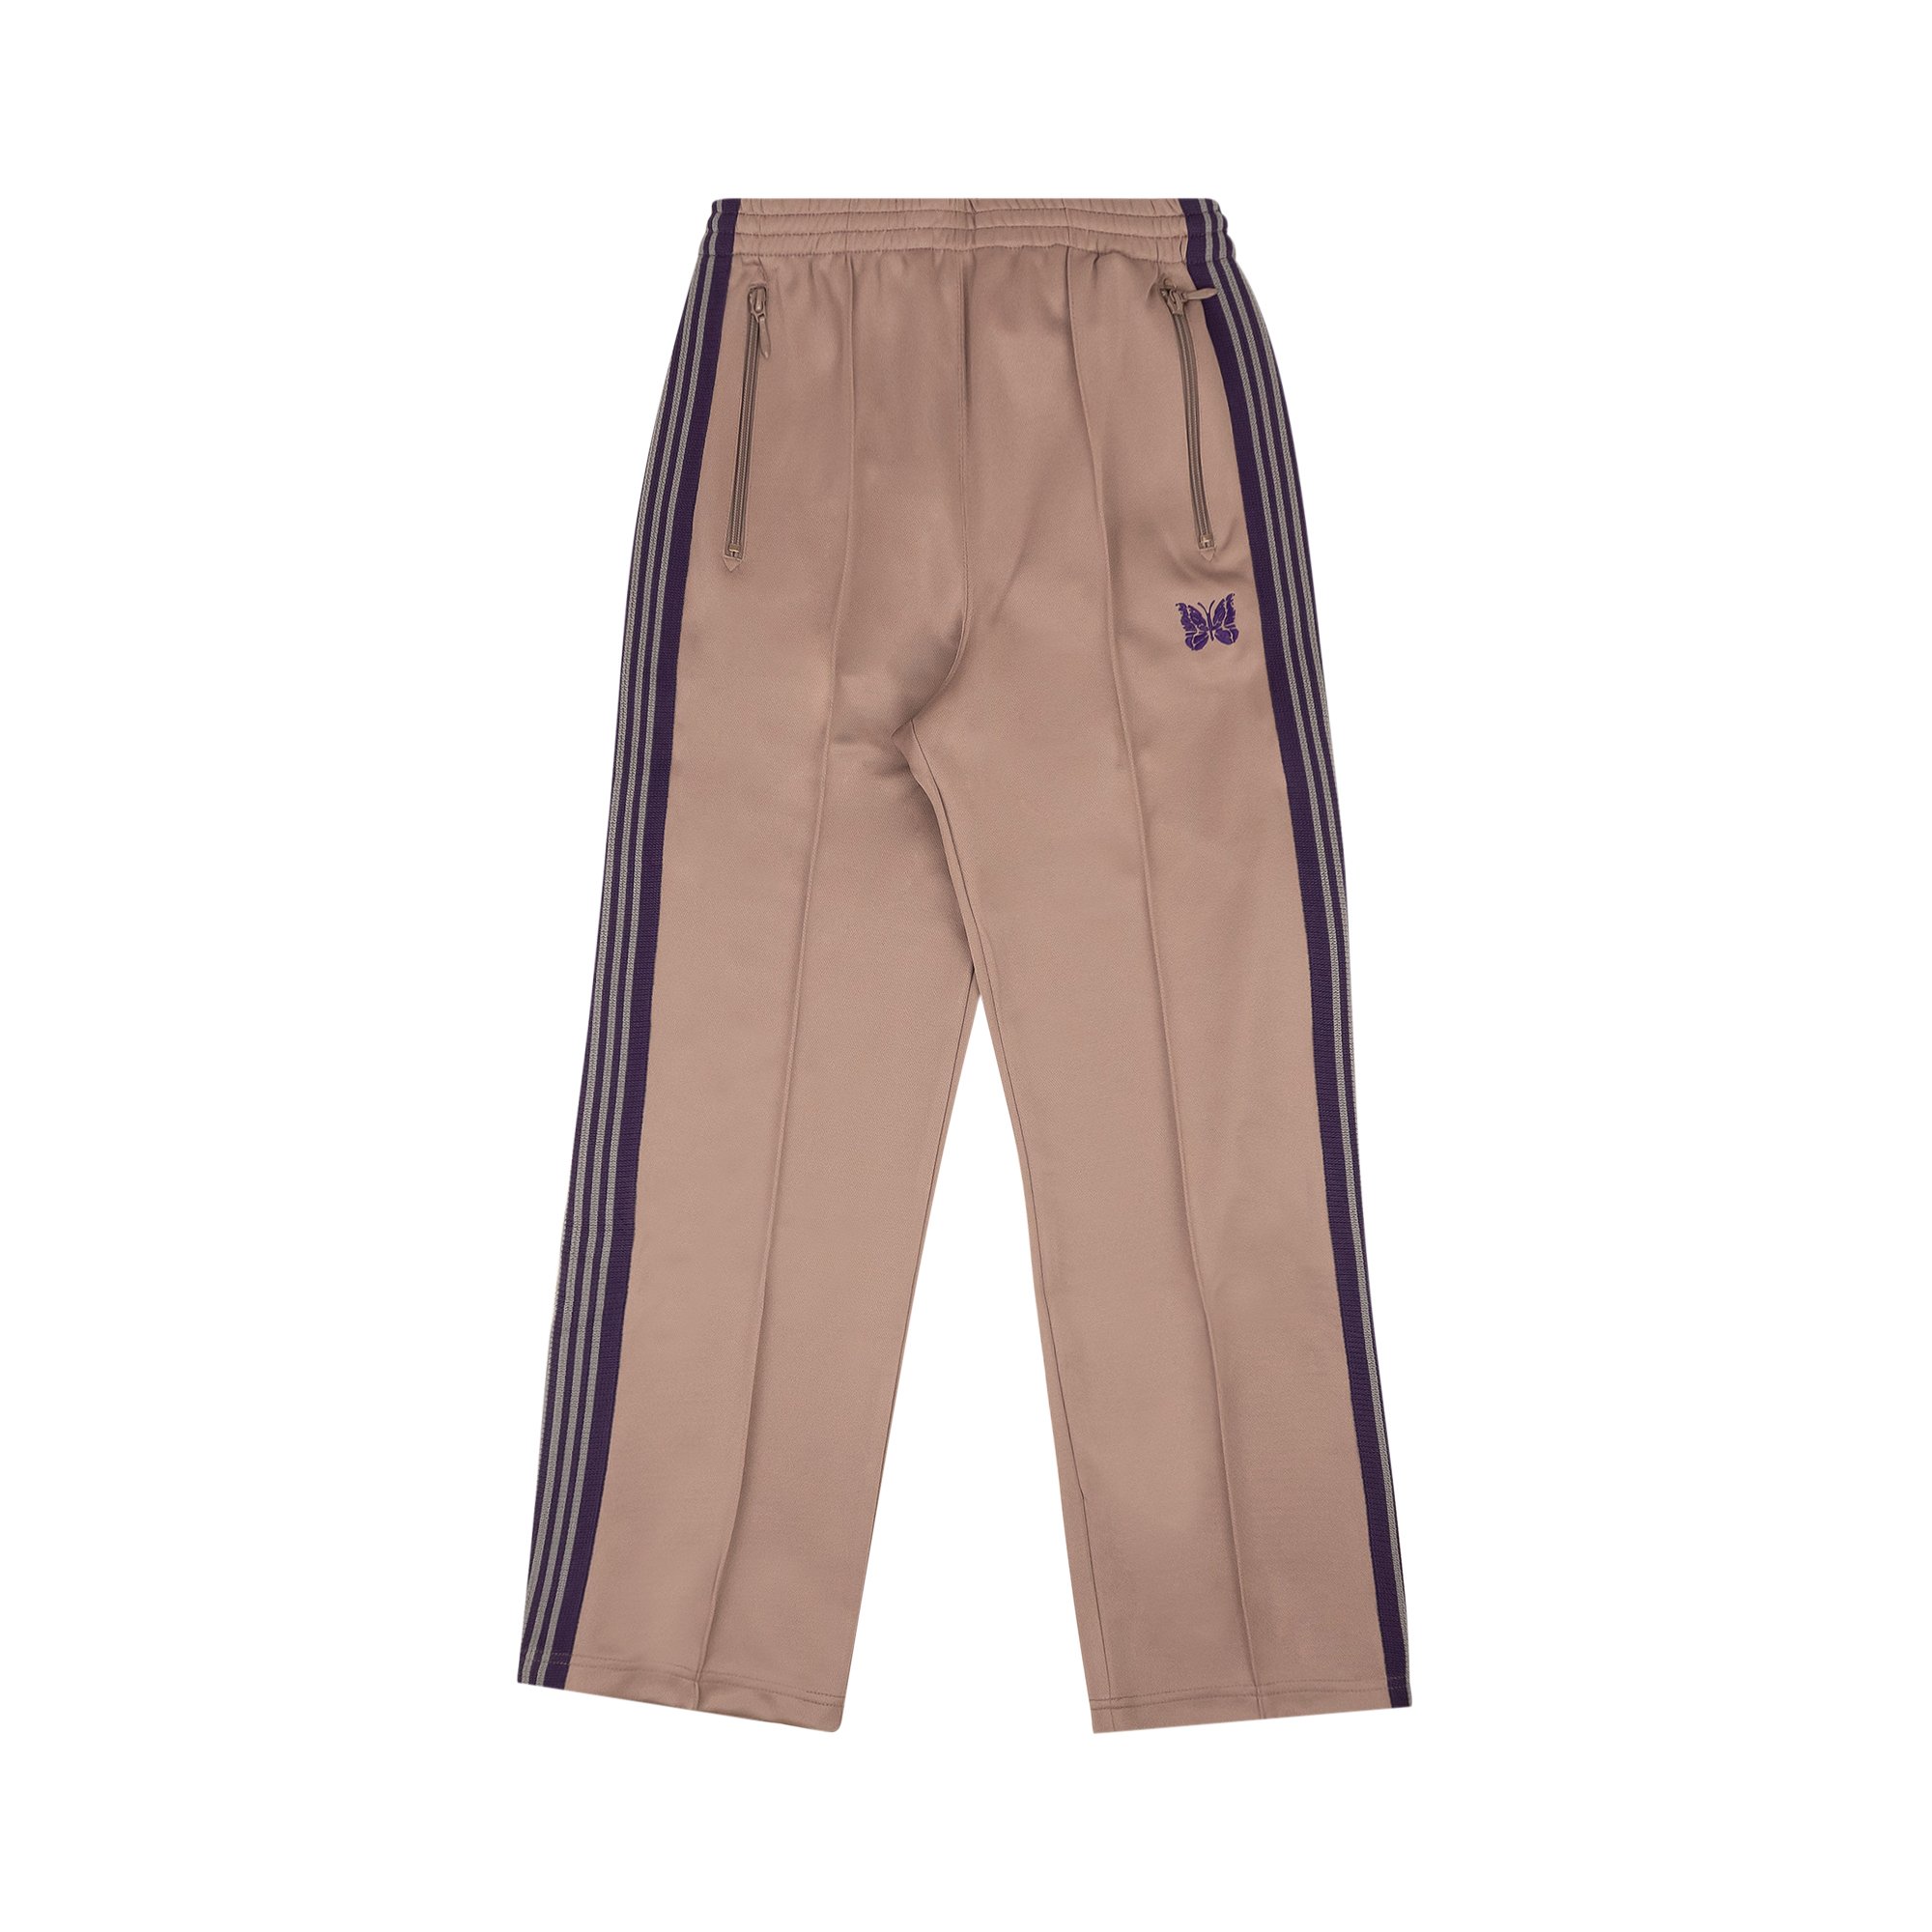 Buy Needles Track Pant 'Taupe' - LQ229 A TAUP | GOAT UK